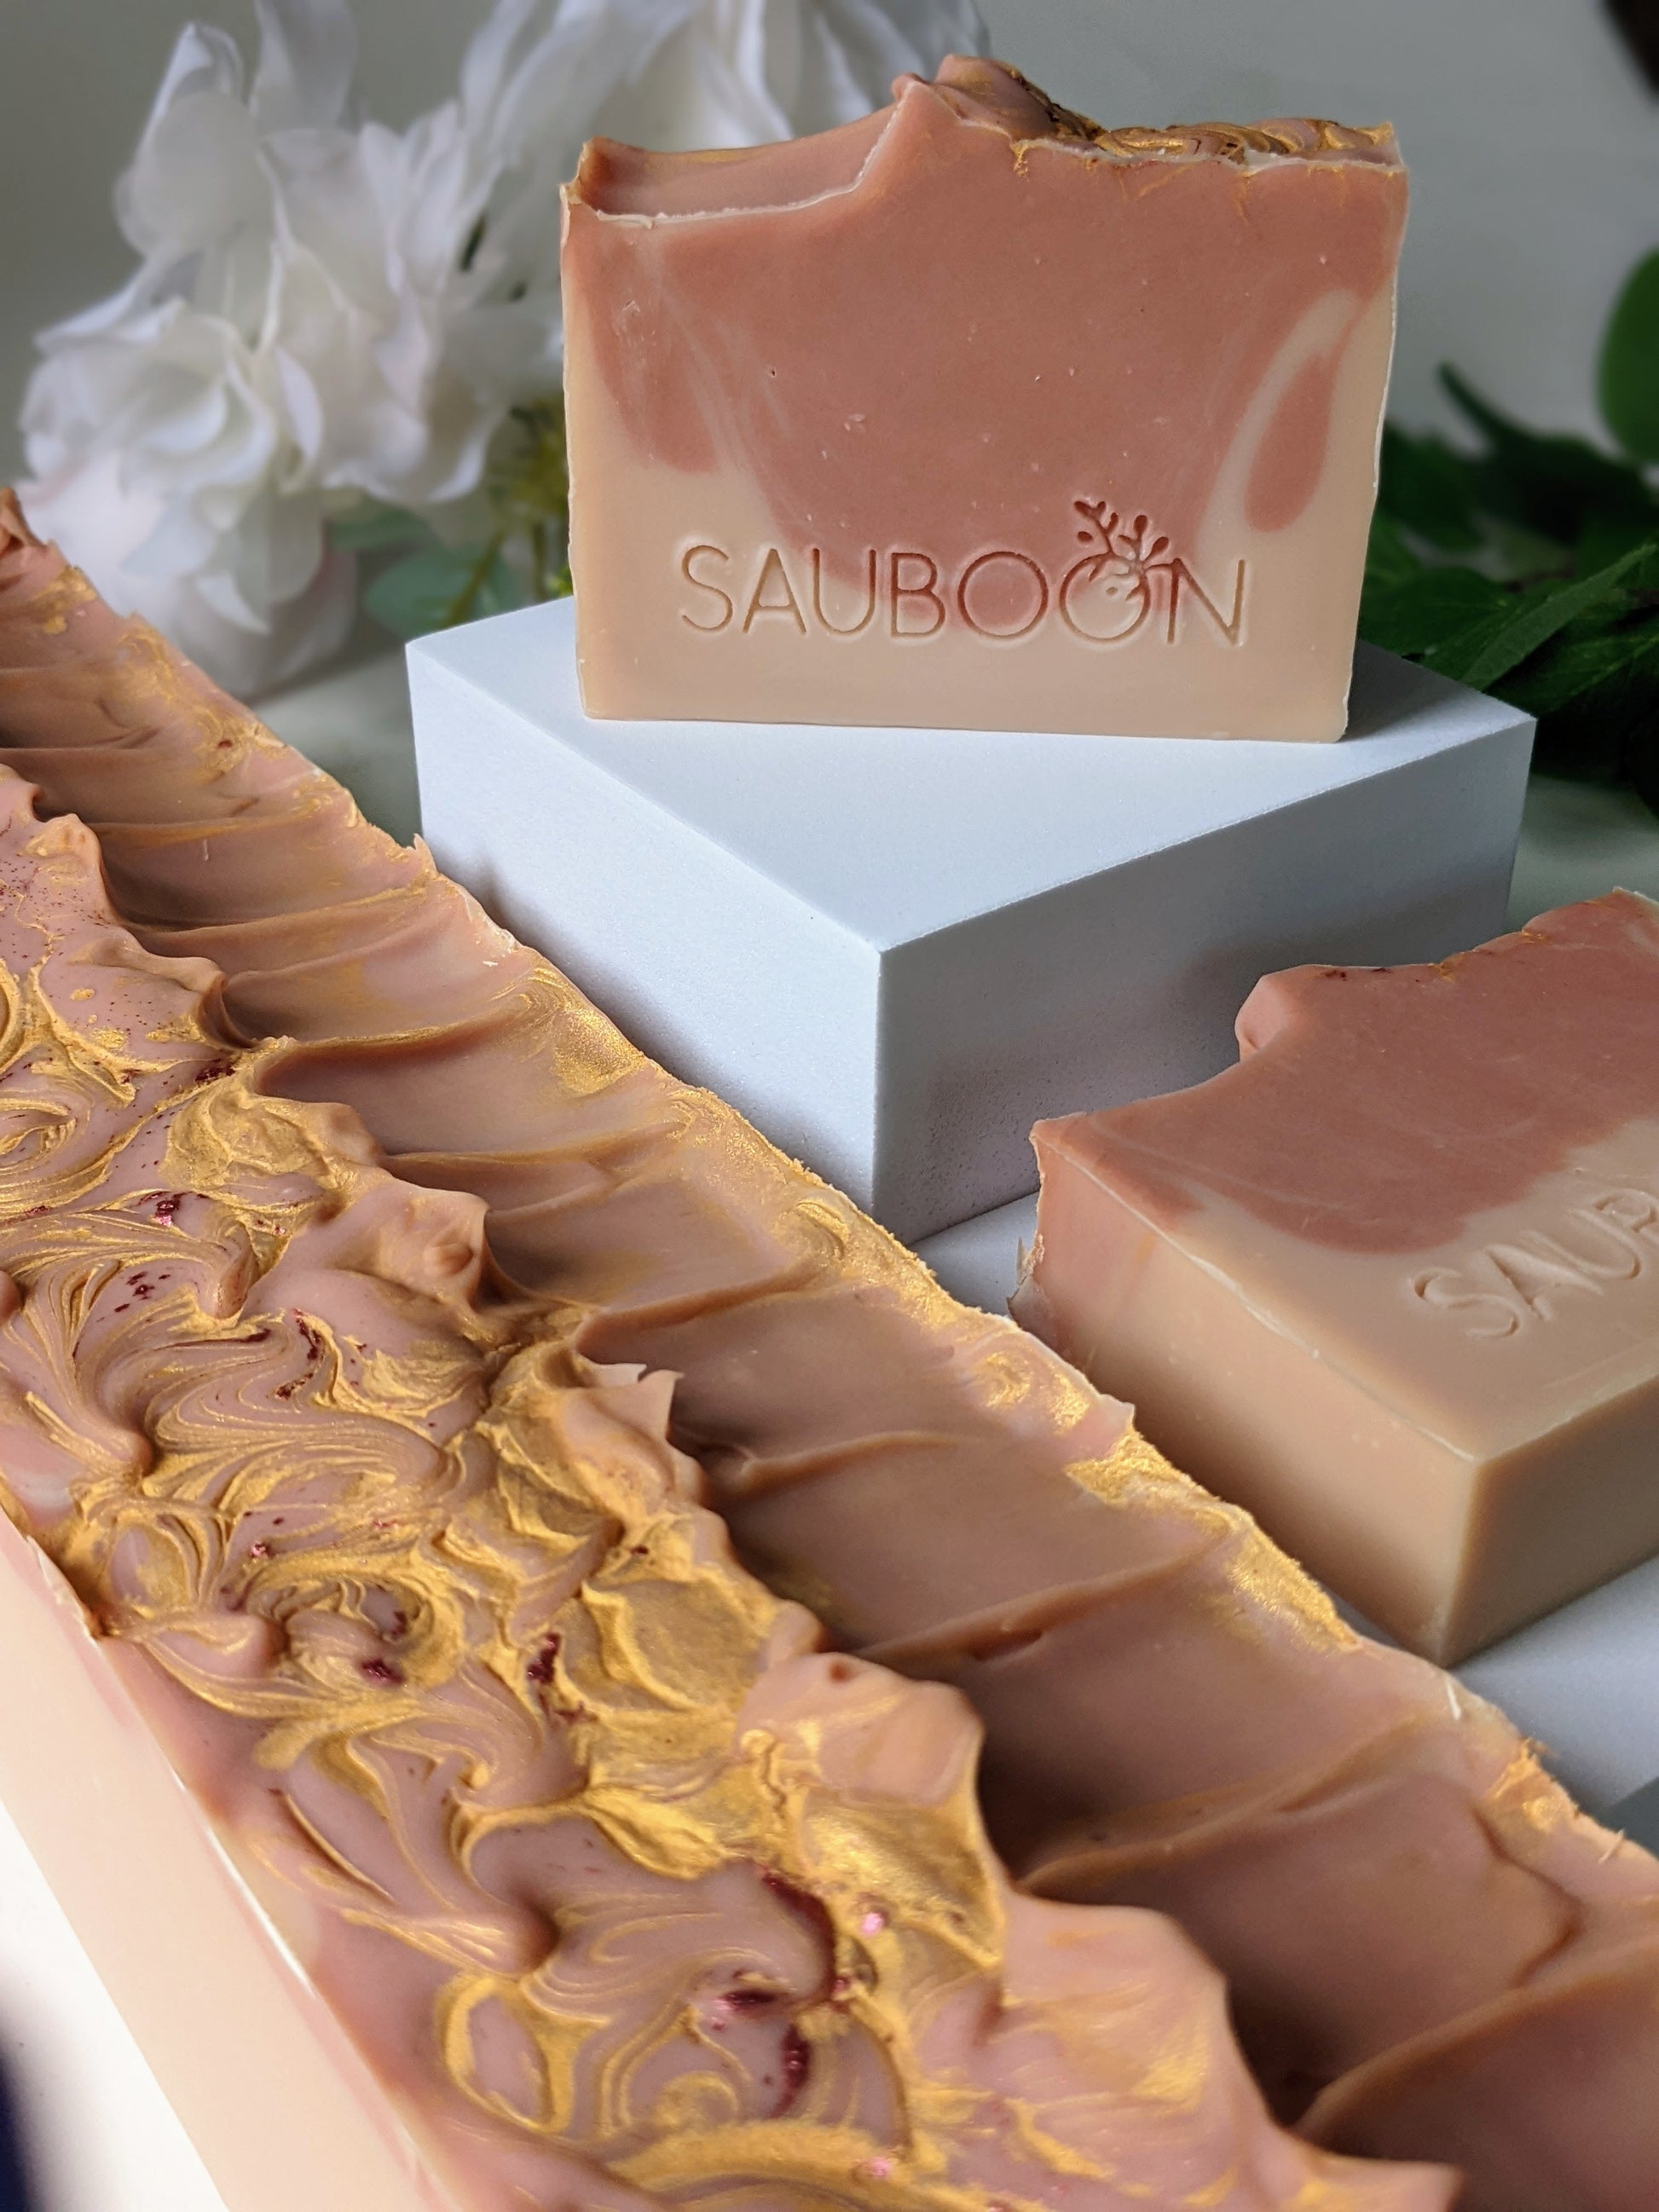 Cashmere vegan handcrafted soaps. Our handcrafted luxurious soaps are made locally here in San Diego in small batches. Highest quality ingredients used to give the best lather, nourishment, and cleansing experience. We use different type of clays in each soap including rhasoul clay, kaolin clay, rose clay, red Moroccan clay, French green clay which add to the beautiful washing experience using our soaps. Great for gifting for birthdays, celebrations, bridal showers or self care gift to yourself!